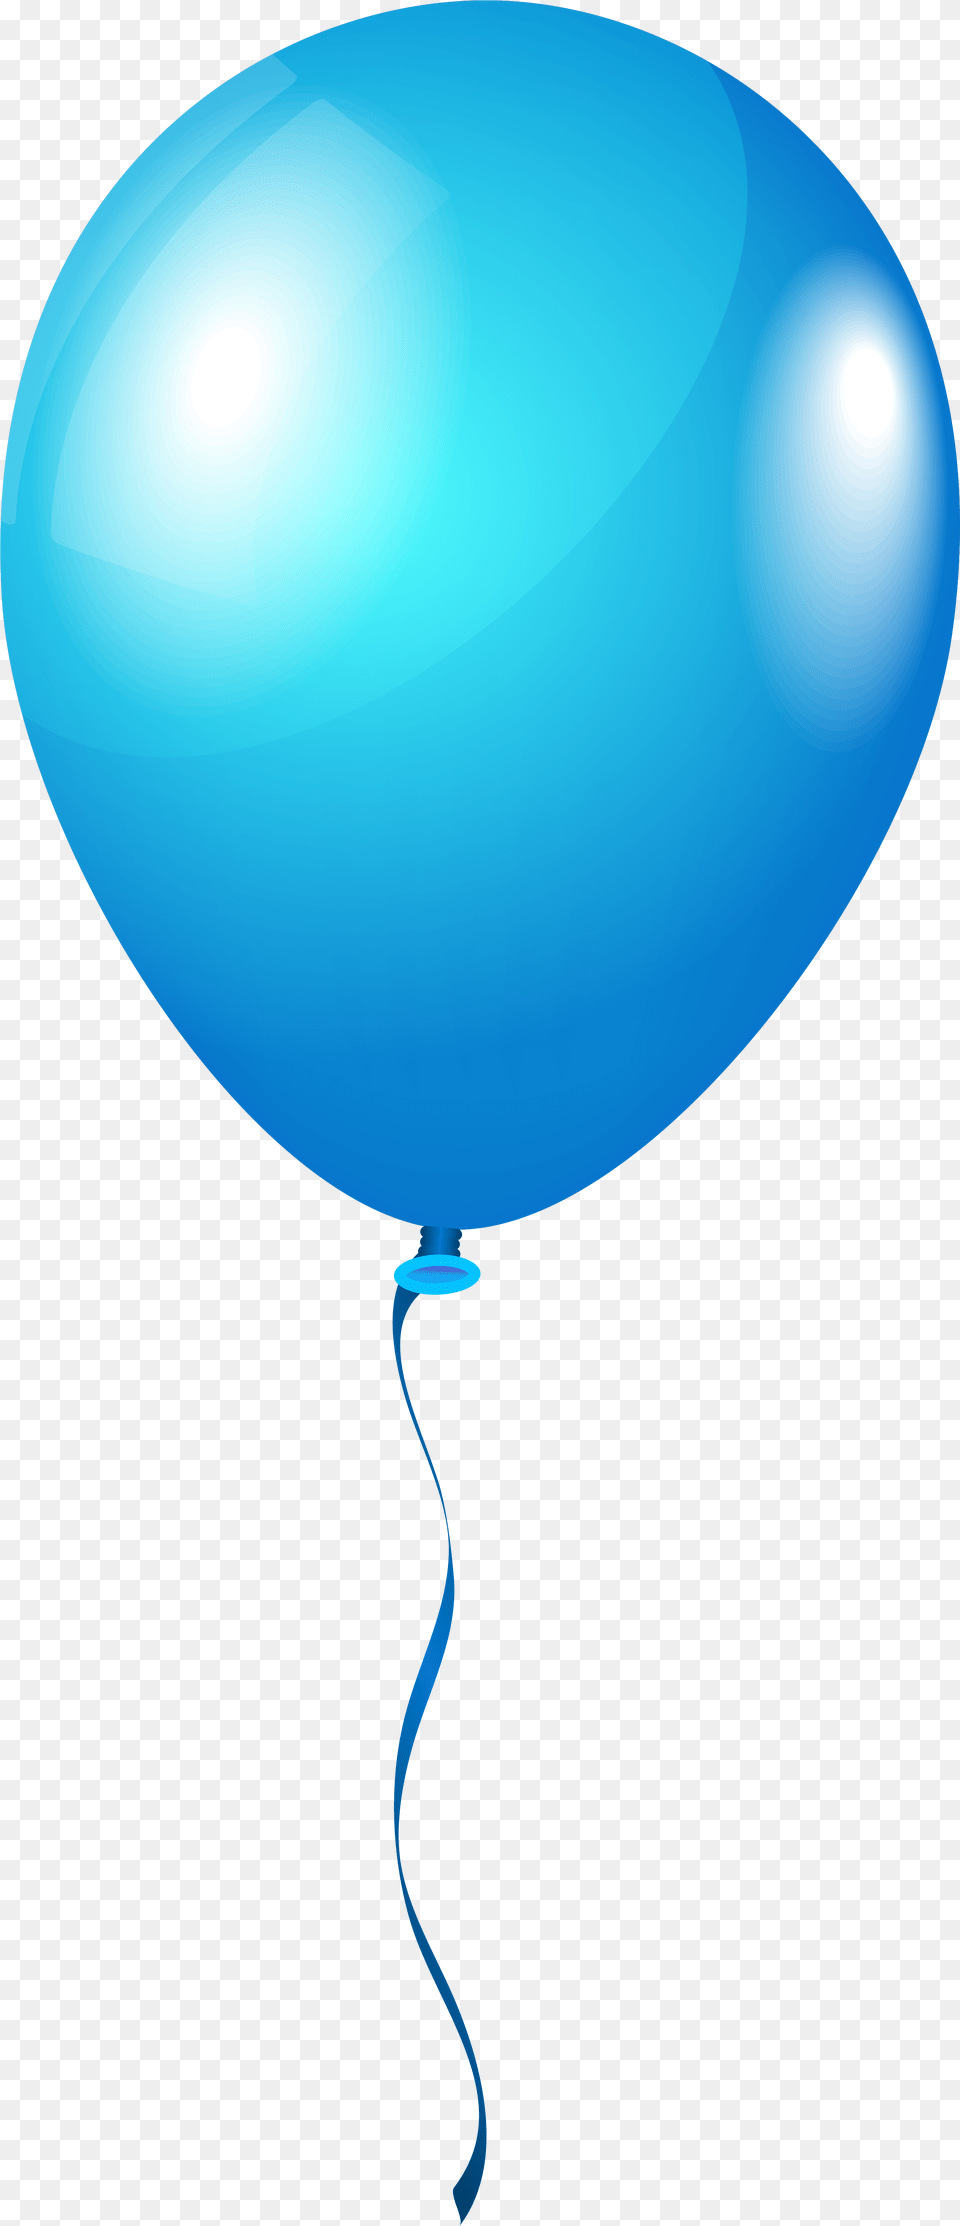 Balloon Transparent Background Blue Balloon Png Image